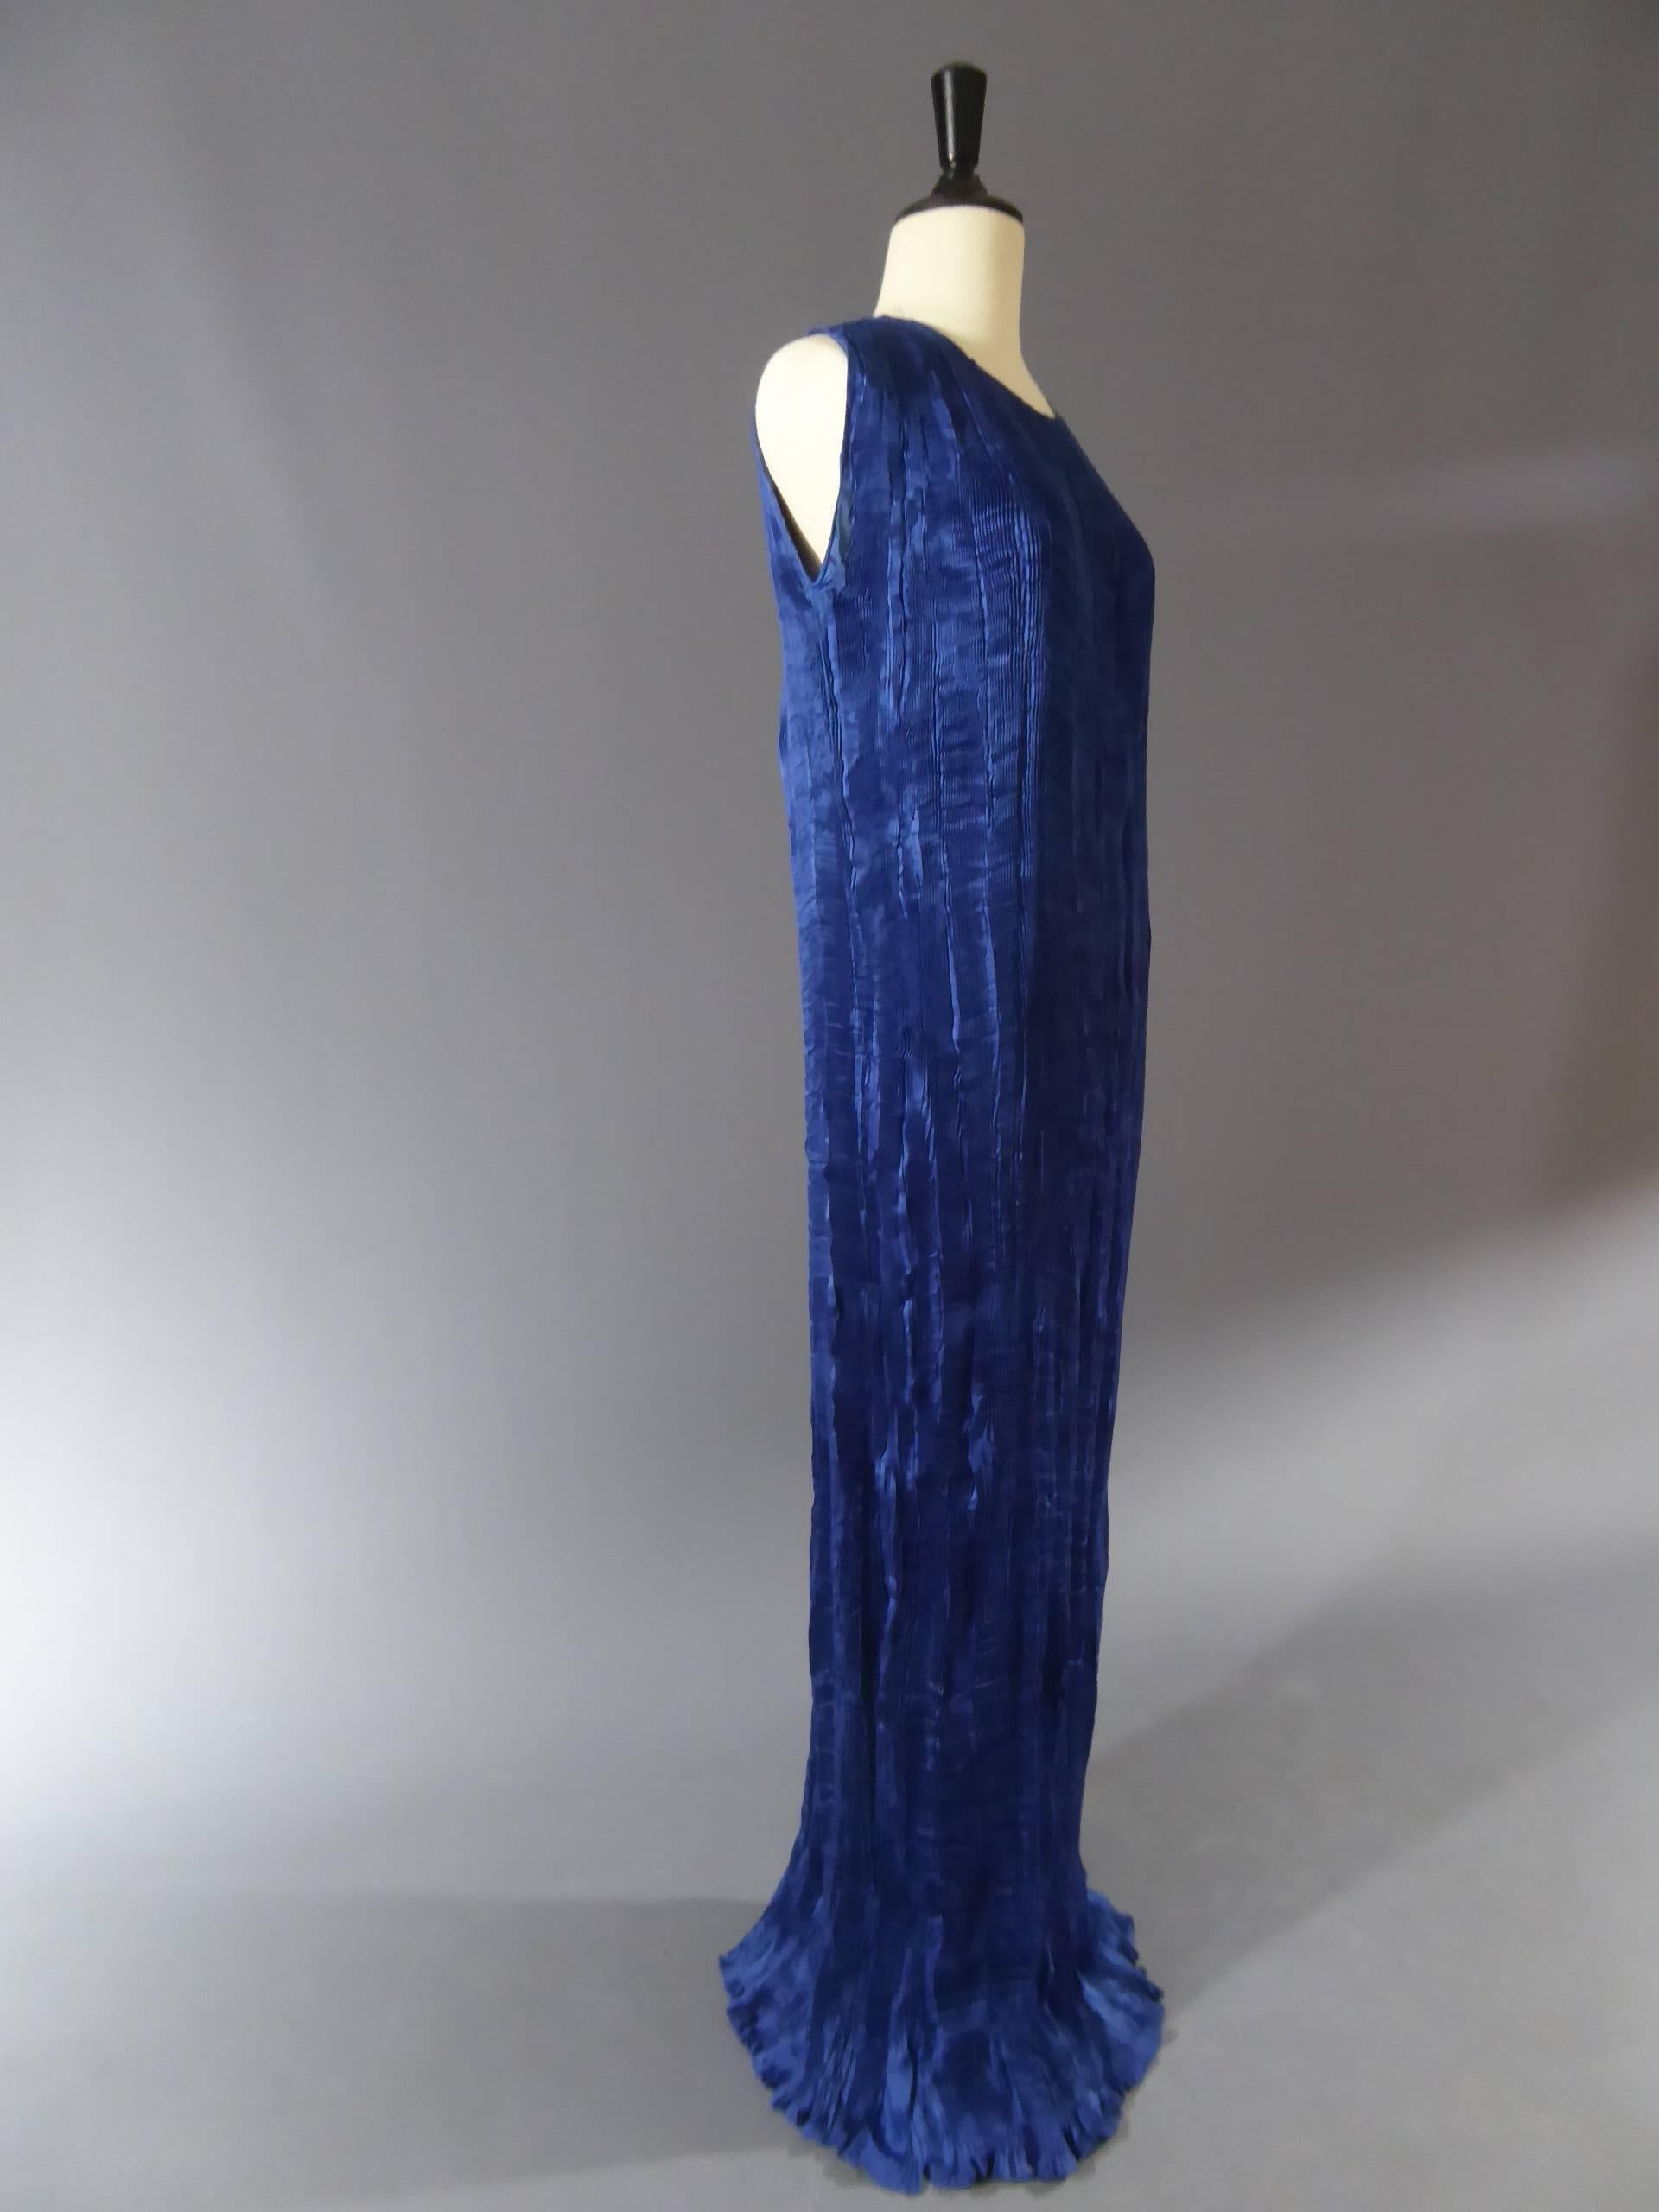 Madame Babani Haute Couture Delphos Gown Circa 1920
Paris
Circa 1920/1930
Satin electric blue silk dress of "Delphos" type inspired by the famous Venetian fashion designer Mariano Fortuny. A finely pleated clothe made in one piece